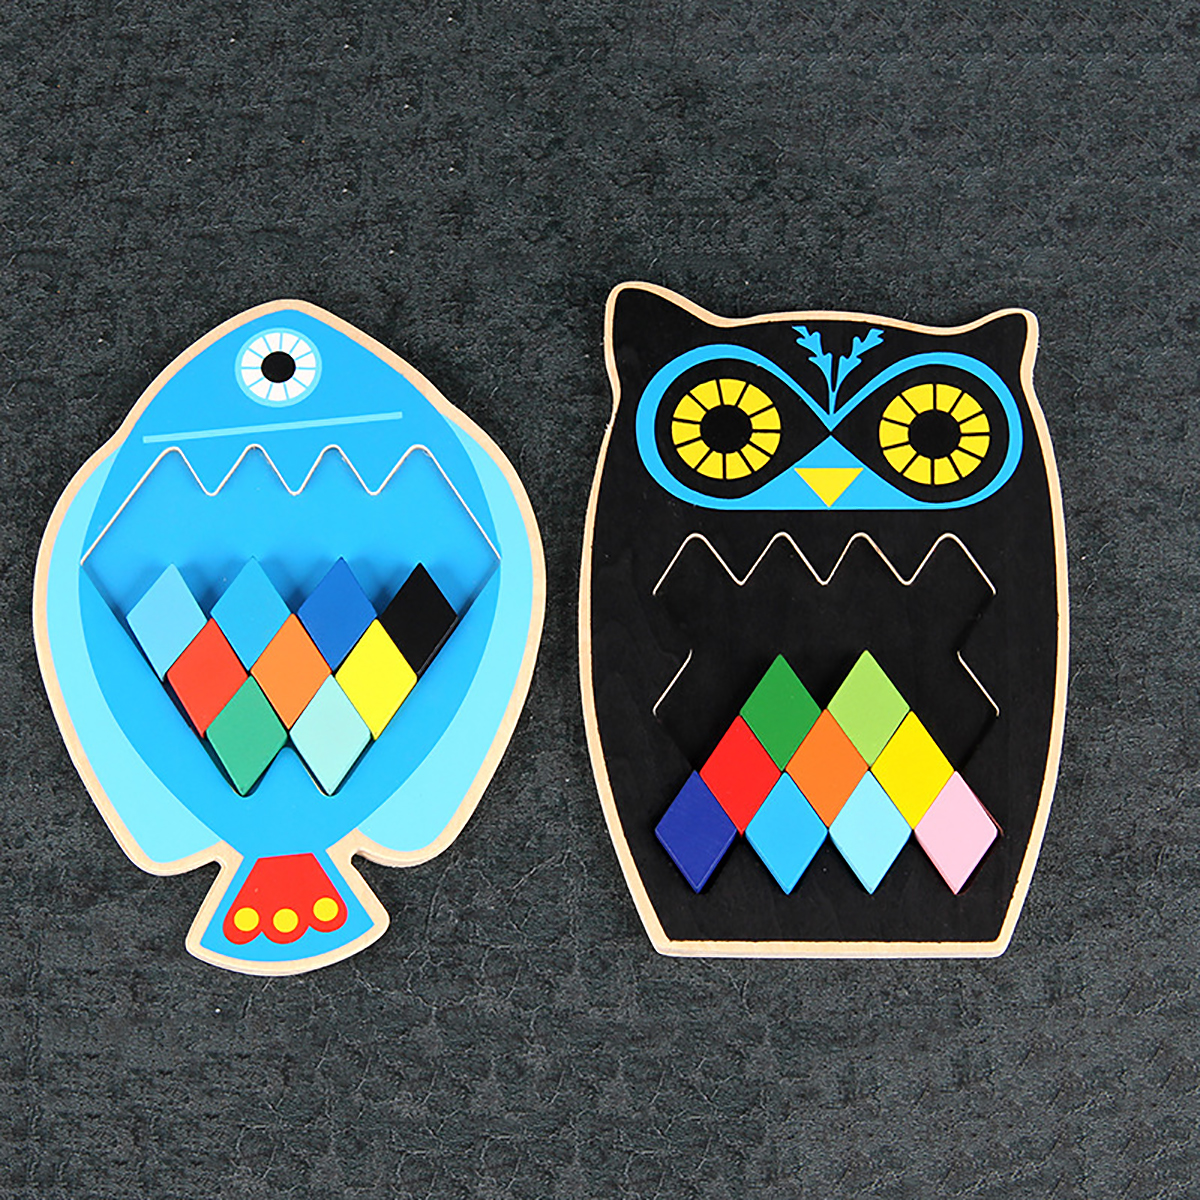 Wood-DIY-Assembly-Jigsaw-Puzzle-Toy-Colors-Shapes-Cartoon-Fish-Owl-Matching-Cards-Toy-for-Children-L-1682195-1